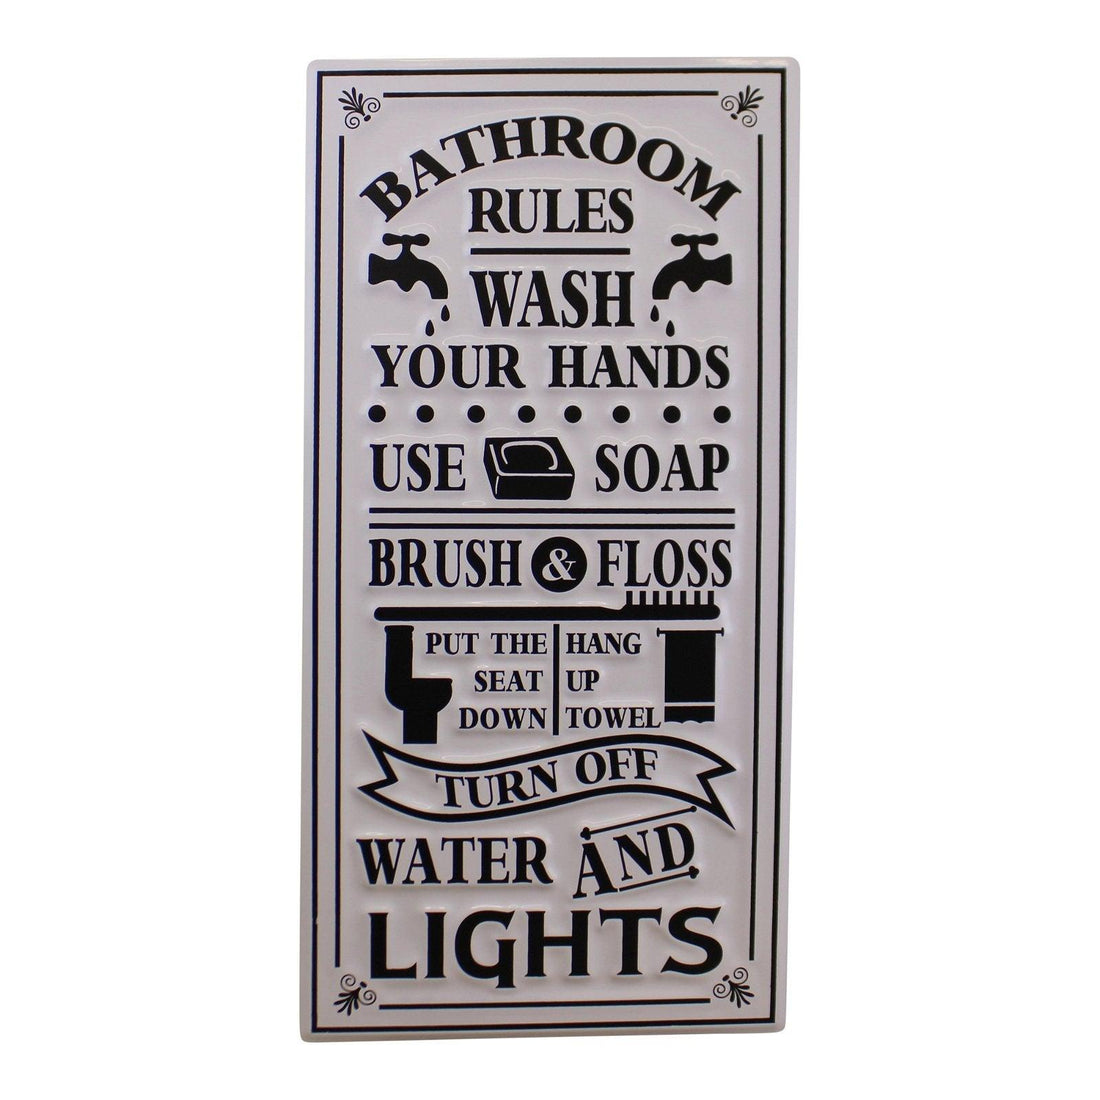 Metal, Wall Hanging Bathroom Rules Plaque, 60x30cm - £20.99 - Signs & Rules 